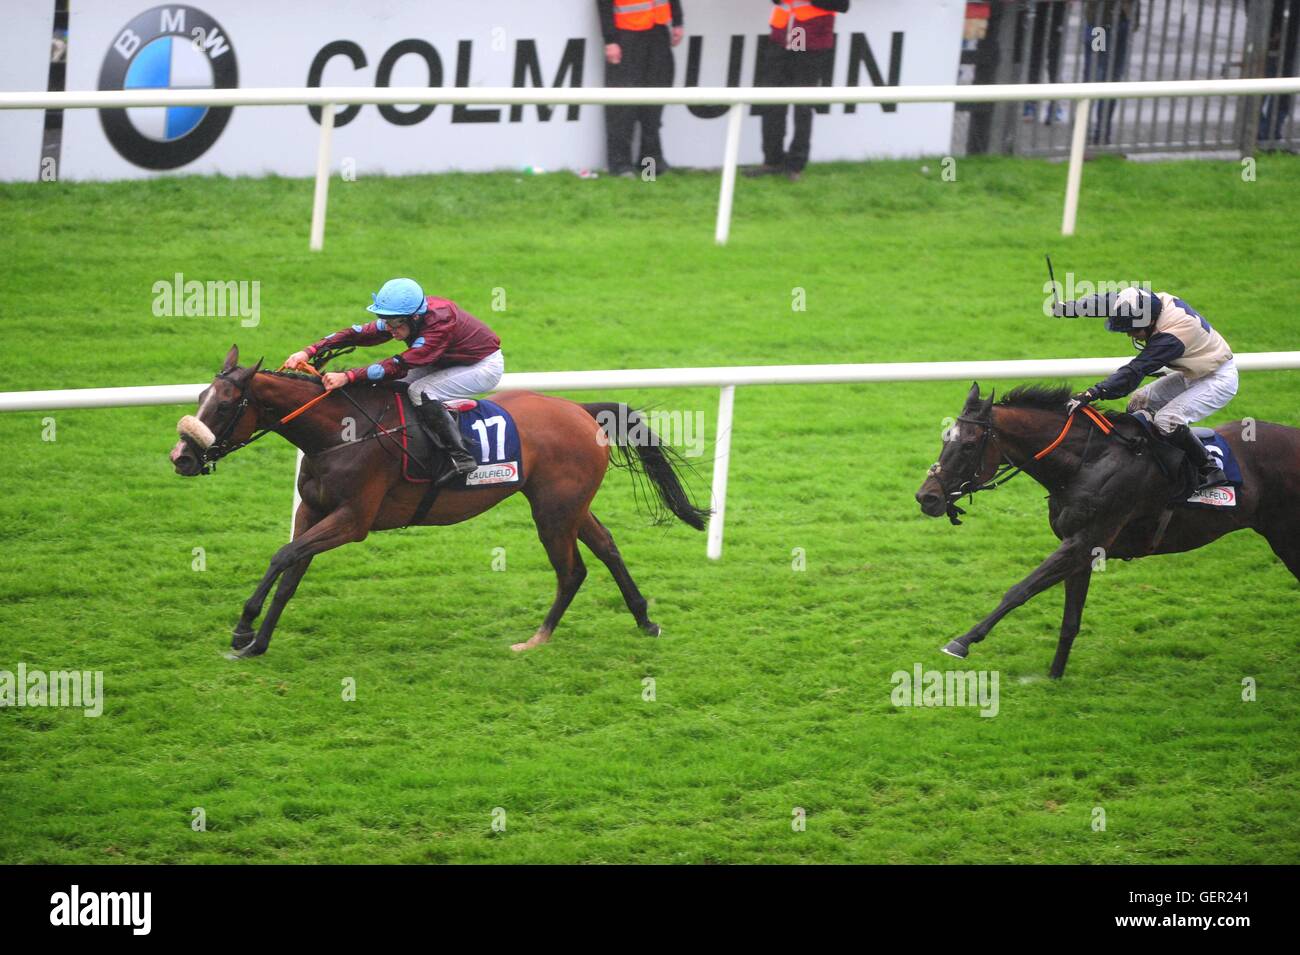 Water Sprite ridden by Michael Hussey wins the Caulfieldindustrial.com Handicap during day two of the Galway Festival in Ballybrit, Ireland. Stock Photo